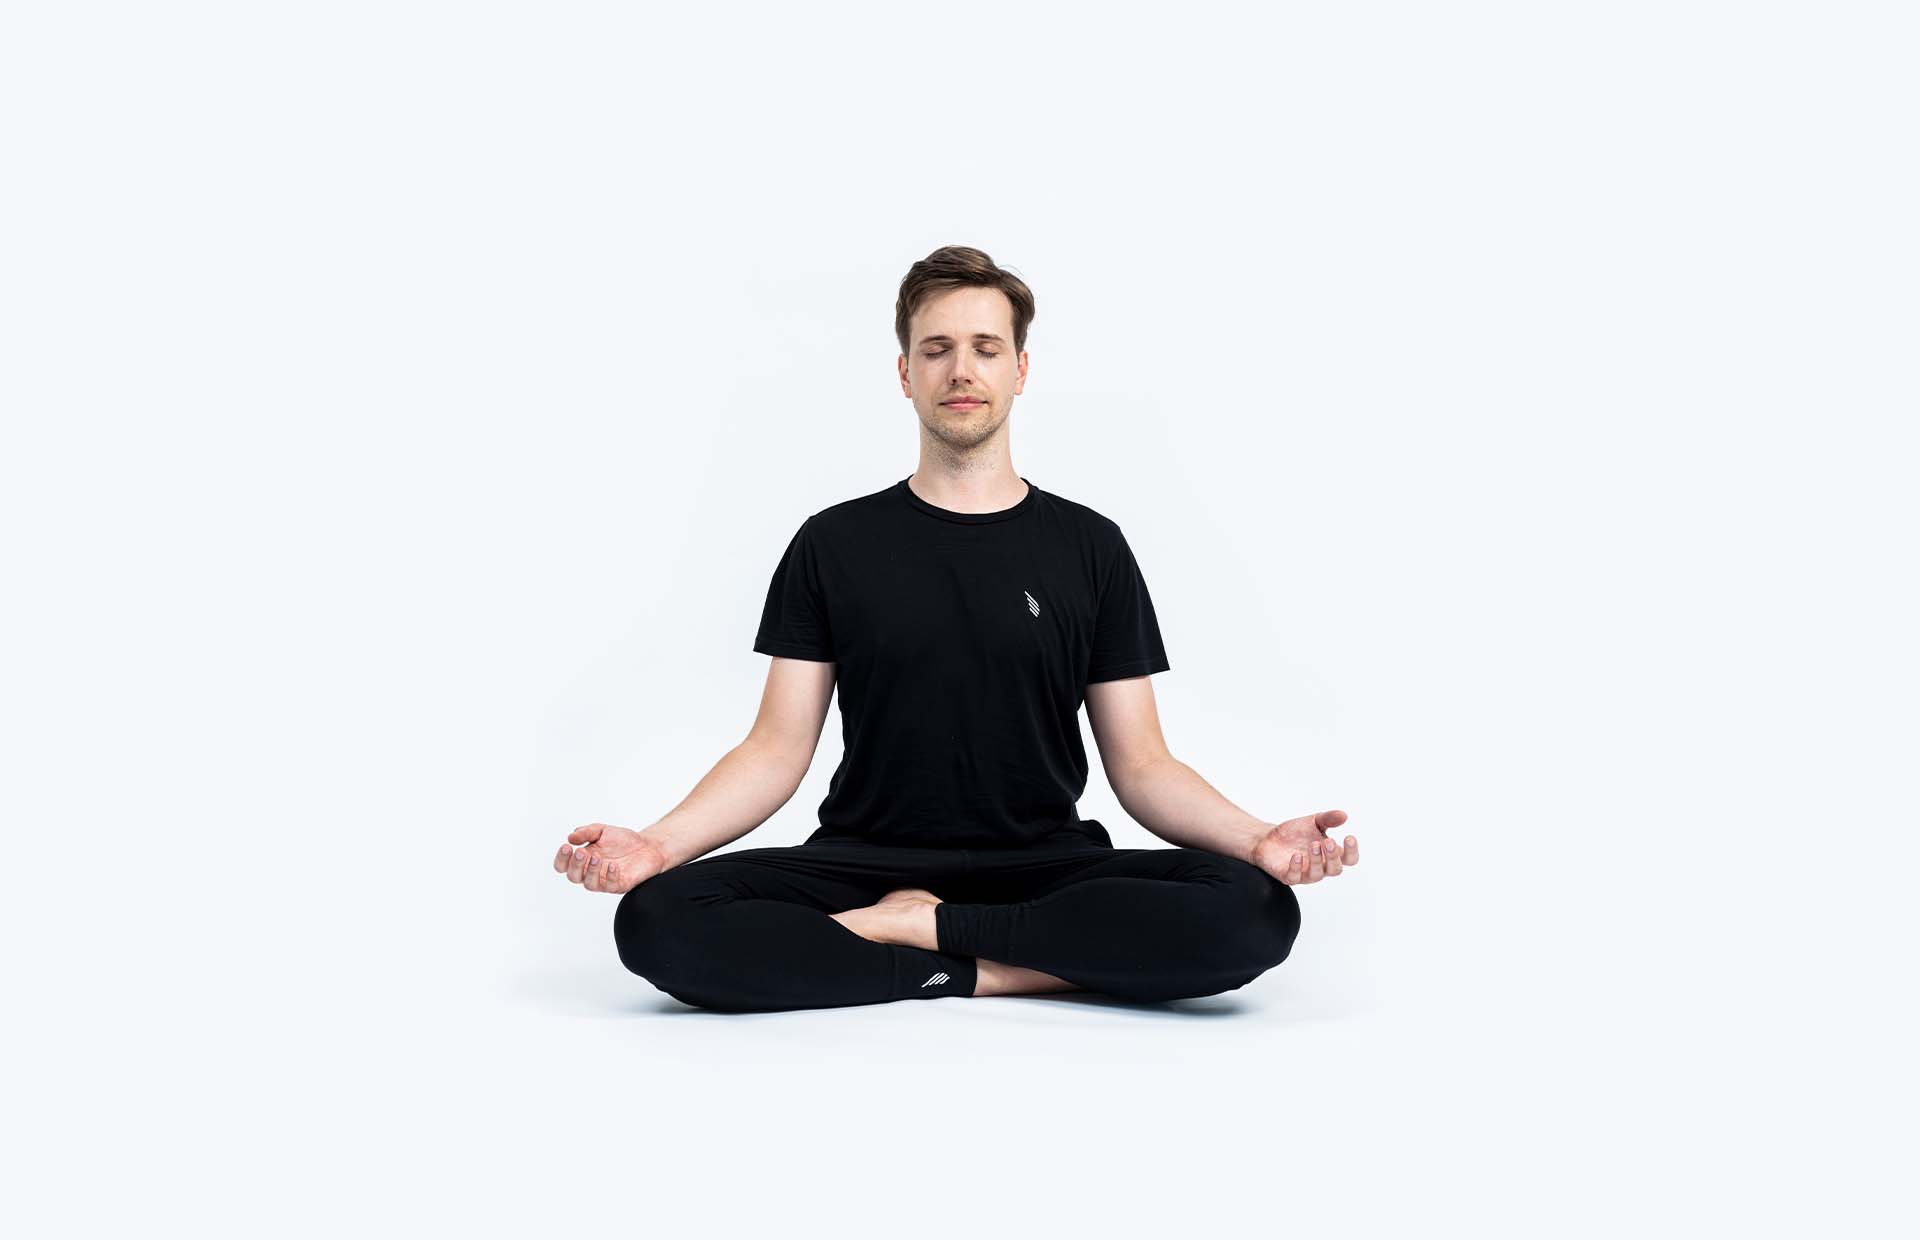 A person sitting in meditation